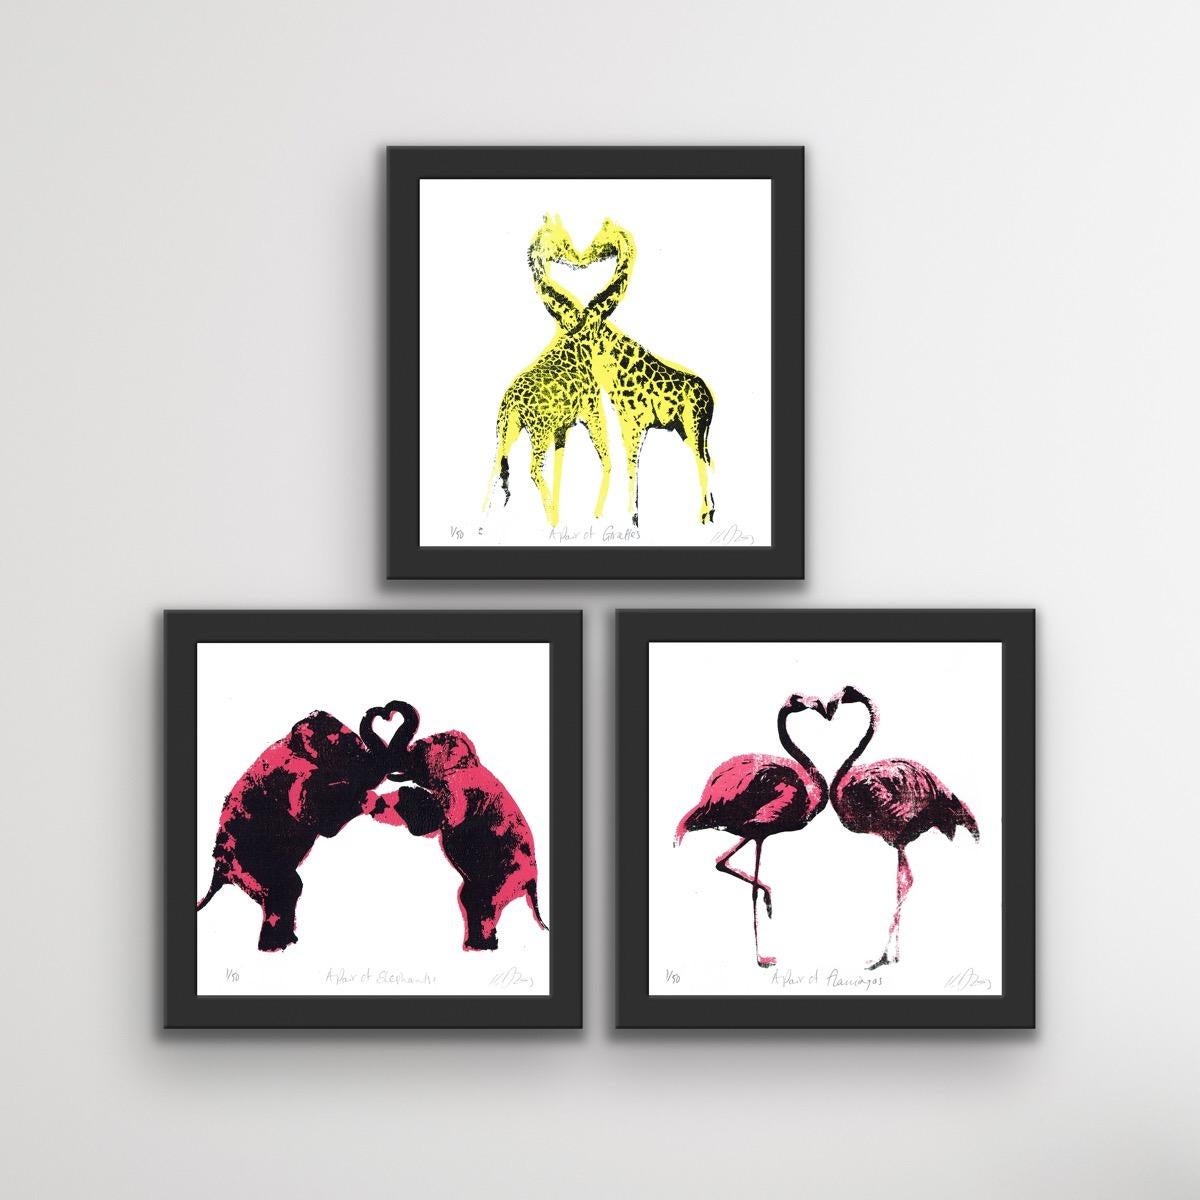 Katie Edwards Animal Print - A Pair of Flamingos, A Pair of Giraffes and A Pair of Elephants Triptych